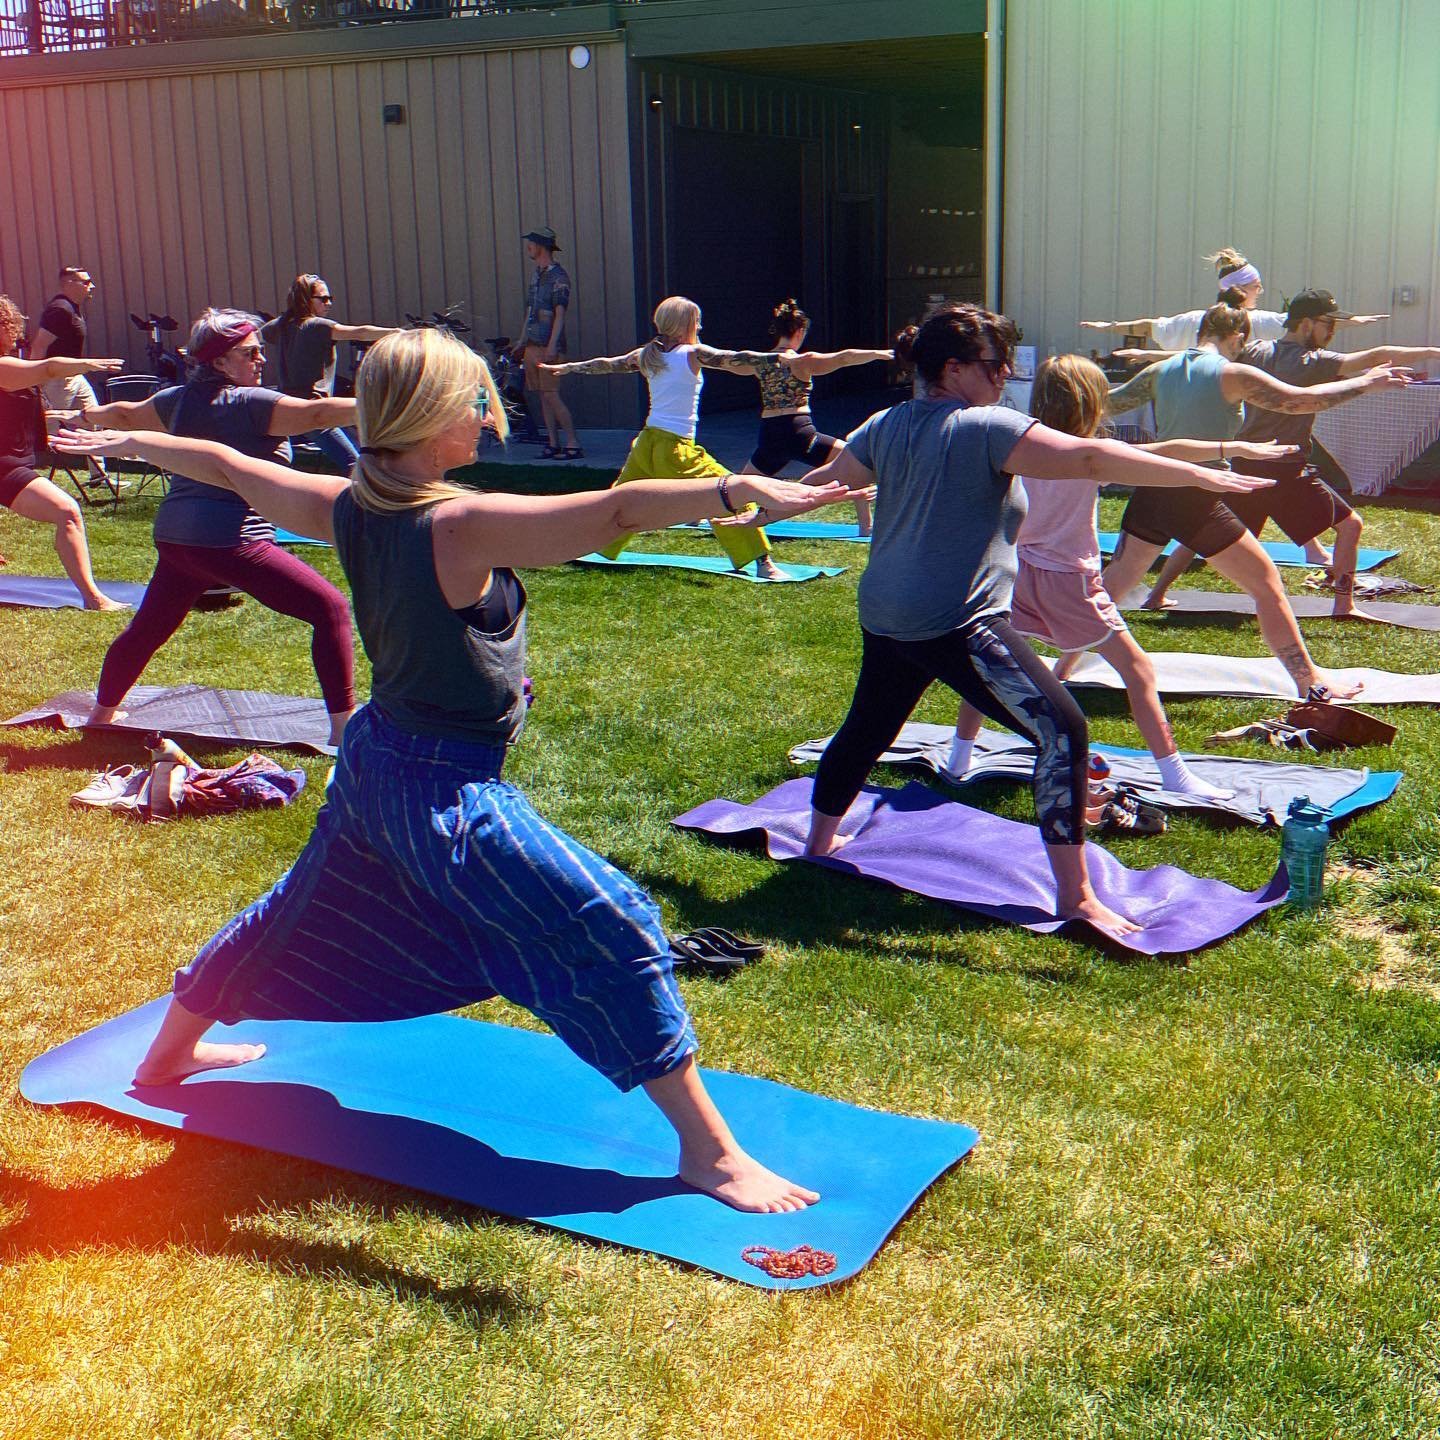 Movement is Medicine for the Body 🤸🏼&zwj;♀️💪and doing  Movement with others is Medicine for the Soul 🧘🏼&zwj;♀️✨ 

At the Grand Valley Yoga Fest there will be yoga available for everyBODY 🌸 You get to choose your schedule of classes that fit you